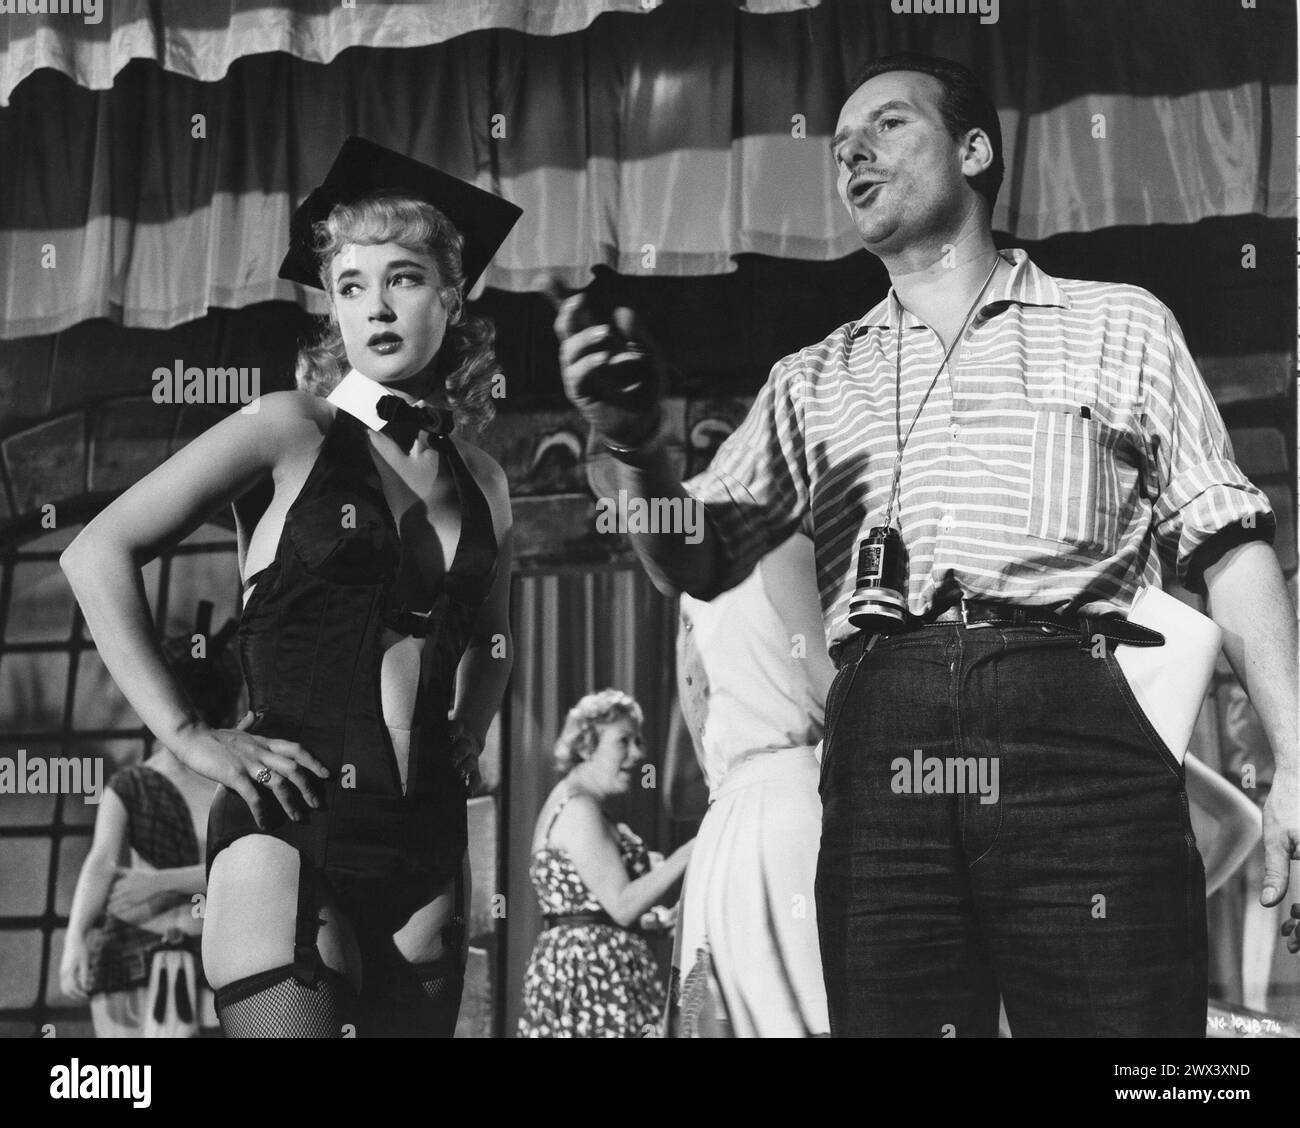 British actress SYLVIA SYMS with director / producer VAL GUEST getting ready to film a scene for EXPRESSO BONGO 1959 also starring LAURENCE HARVEY, YOLANDE DONLAN and CLIFF RICHARD From the stage play by WOLF MANKOWITZ and JULIAN MORE Costume Design BEATRICE DAWSON British Lion Films Stock Photo